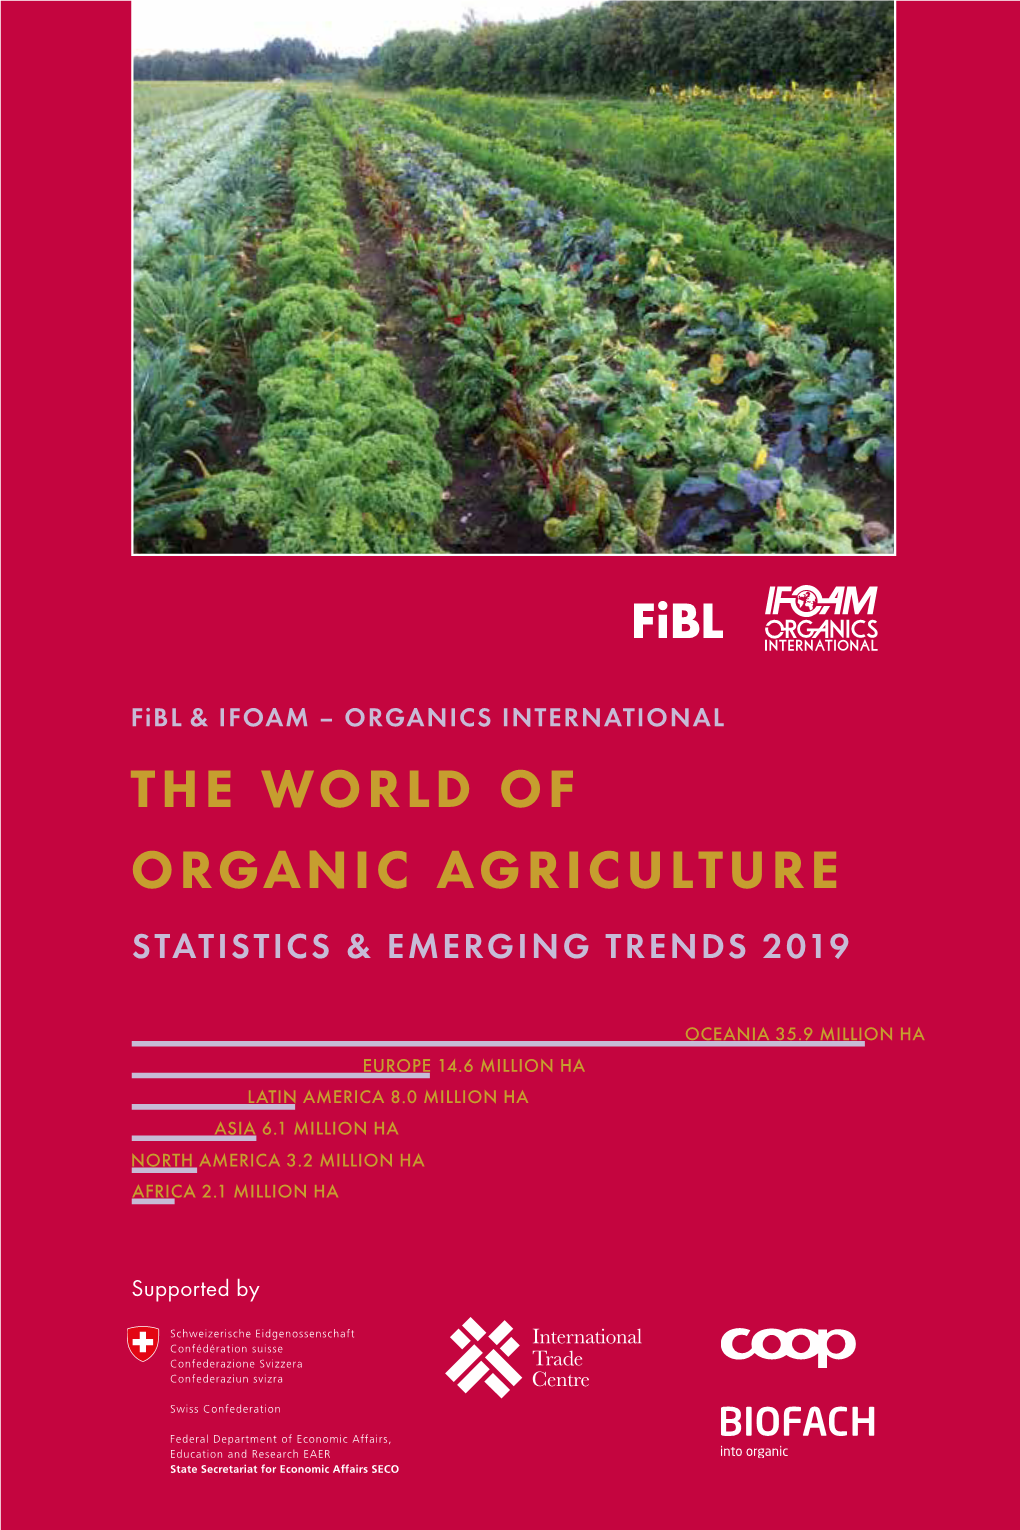 The World of Organic Agriculture STATISTICS & EMERGING TRENDS 2019